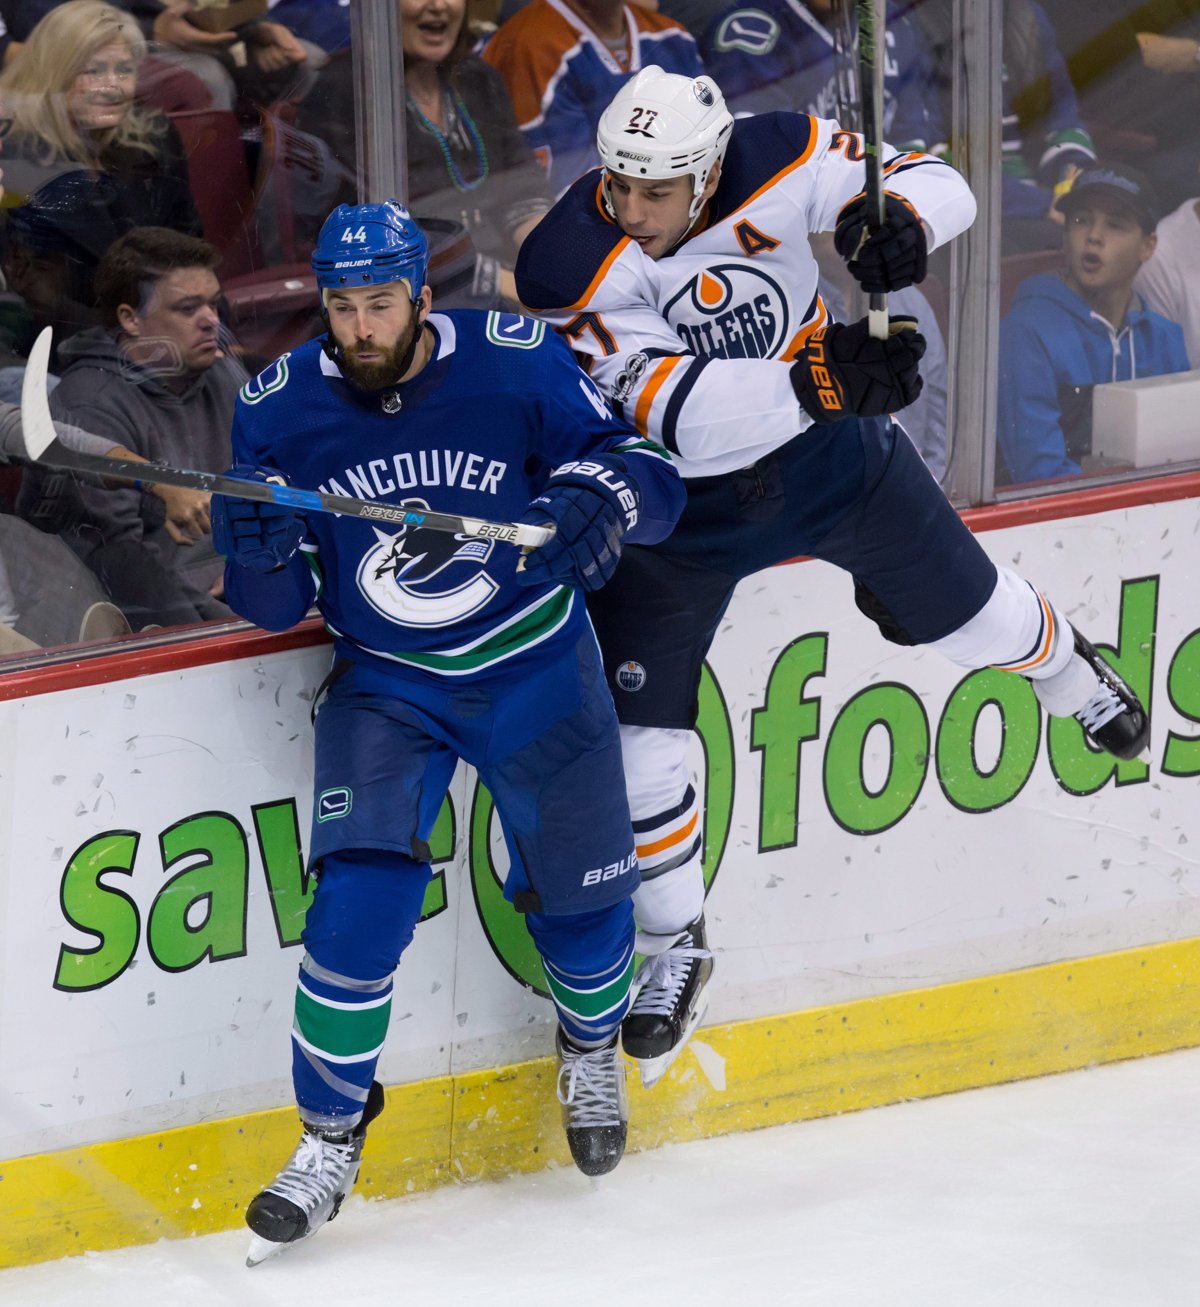 The Vancouver Canucks have started the 2017/18 season off on the right foot, defeating the Edmonton Oilers at home in Rogers Arena Saturday night.